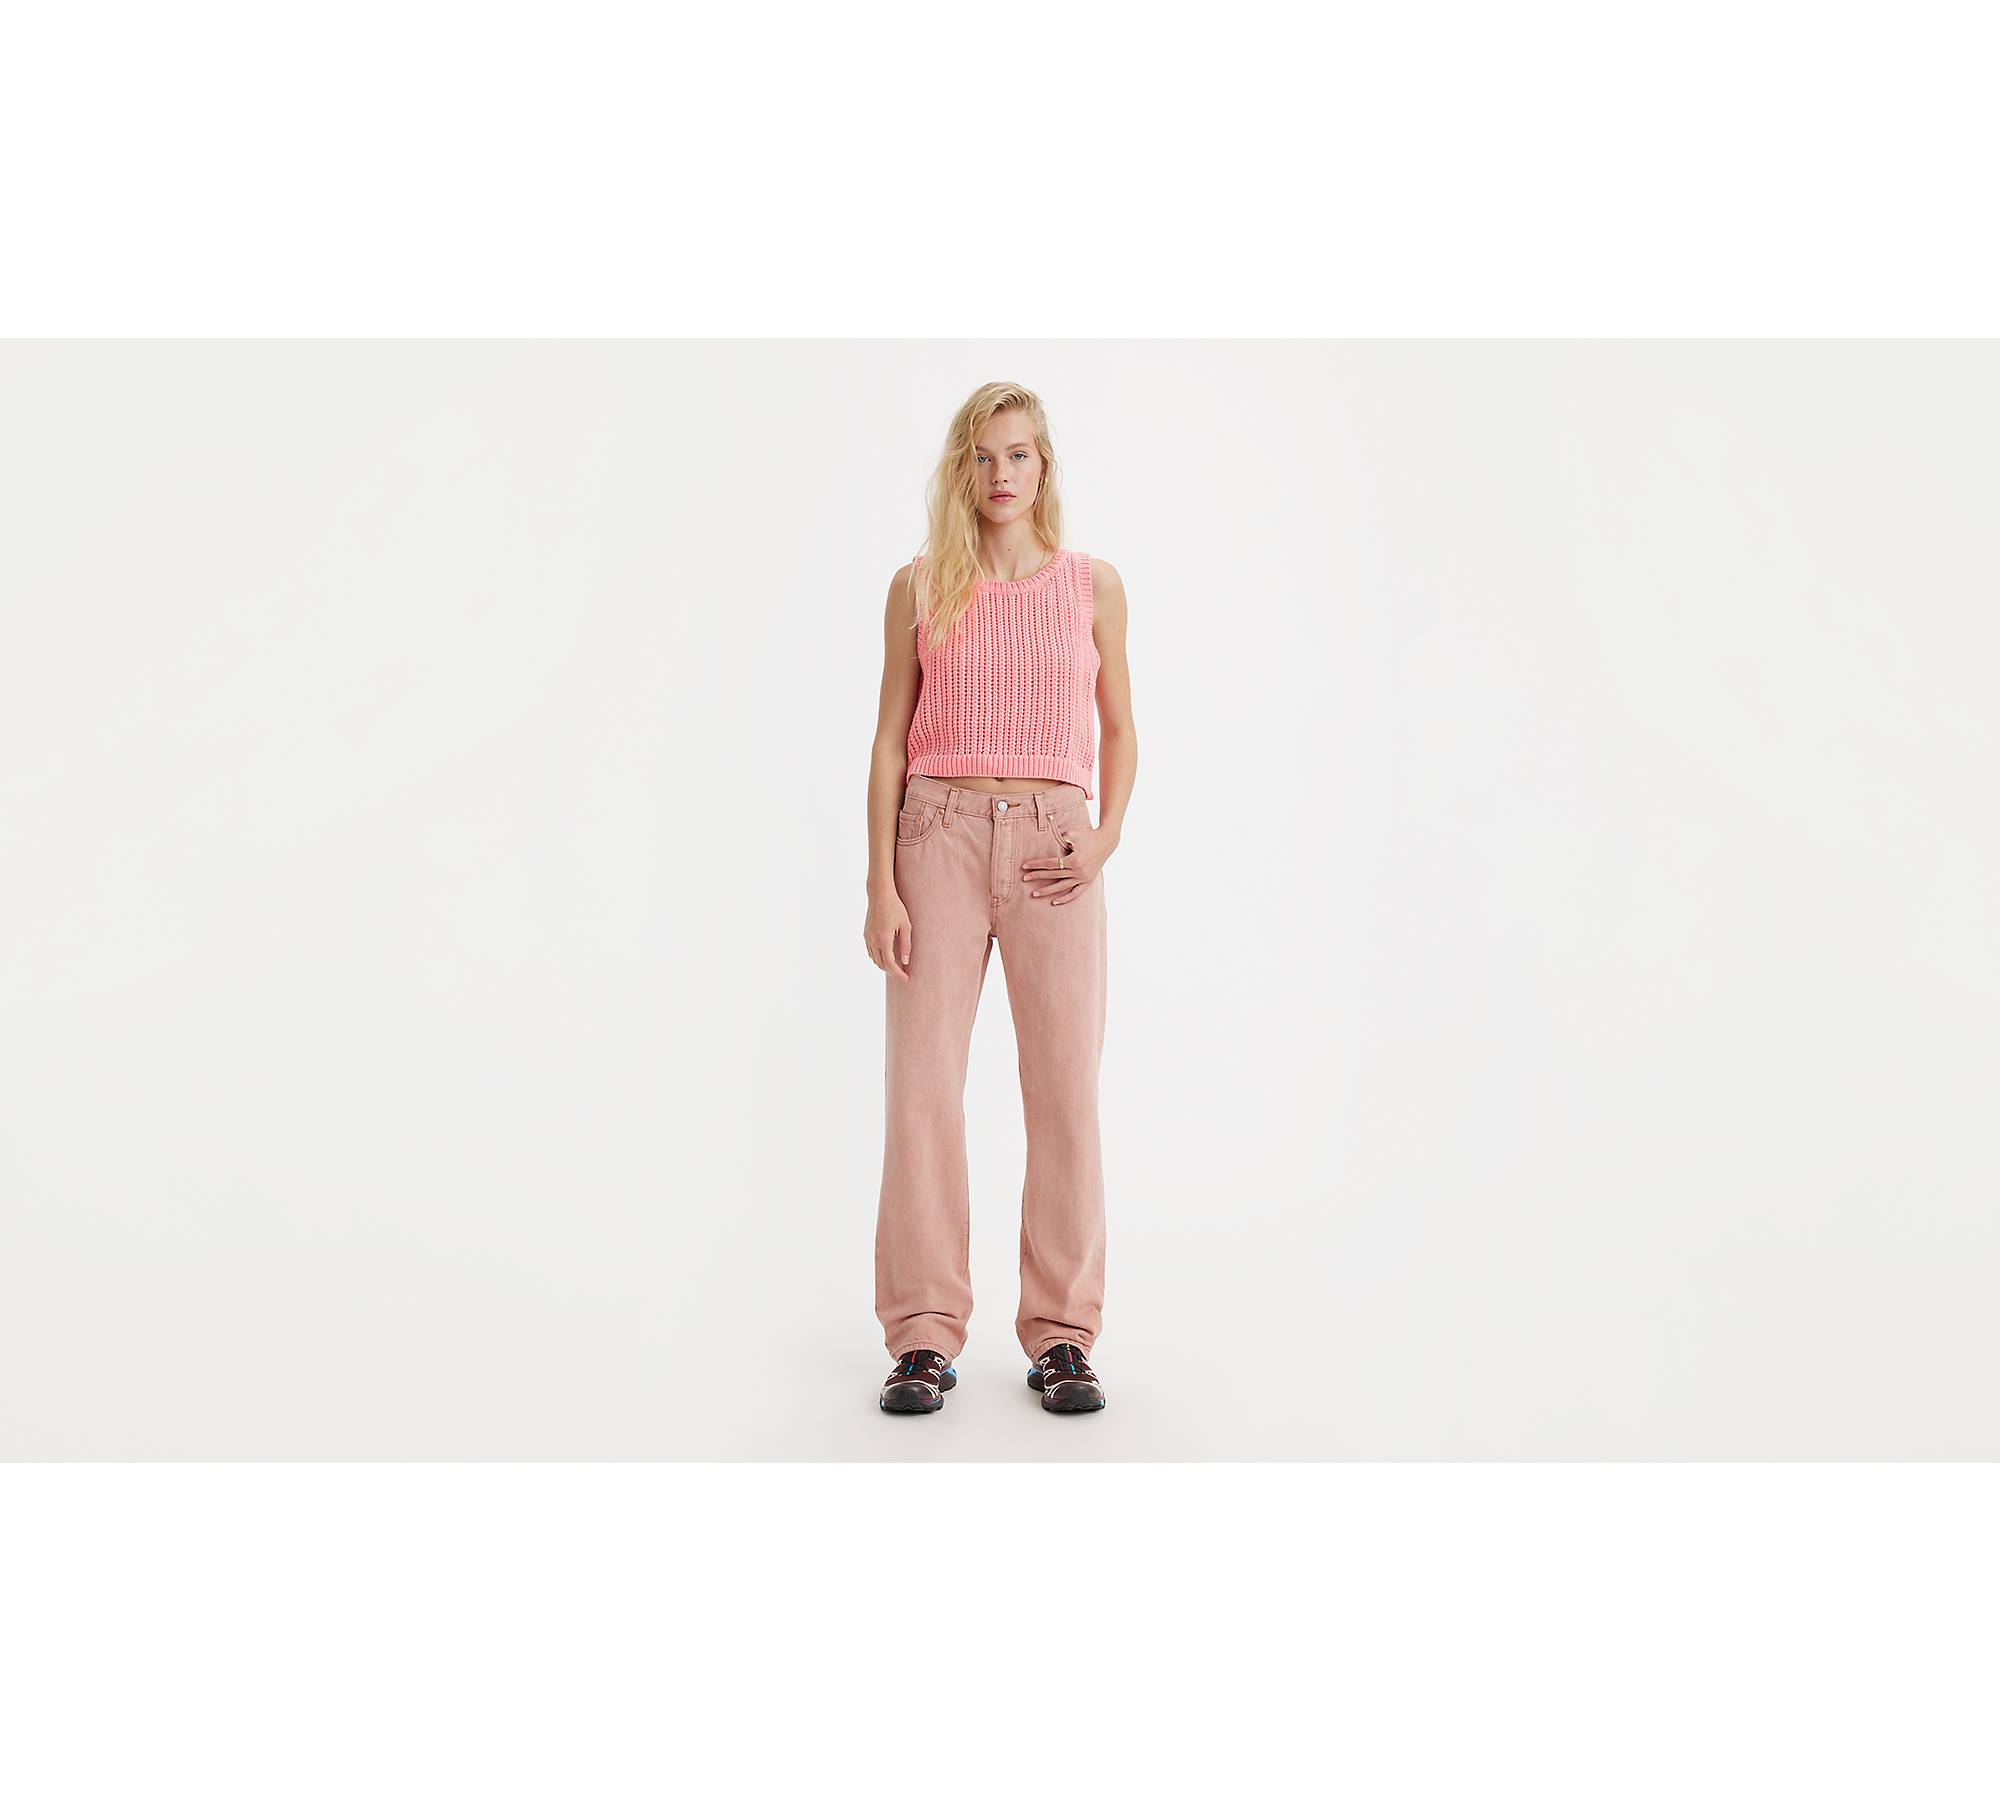 Women's trousers: pants and jeans for womens